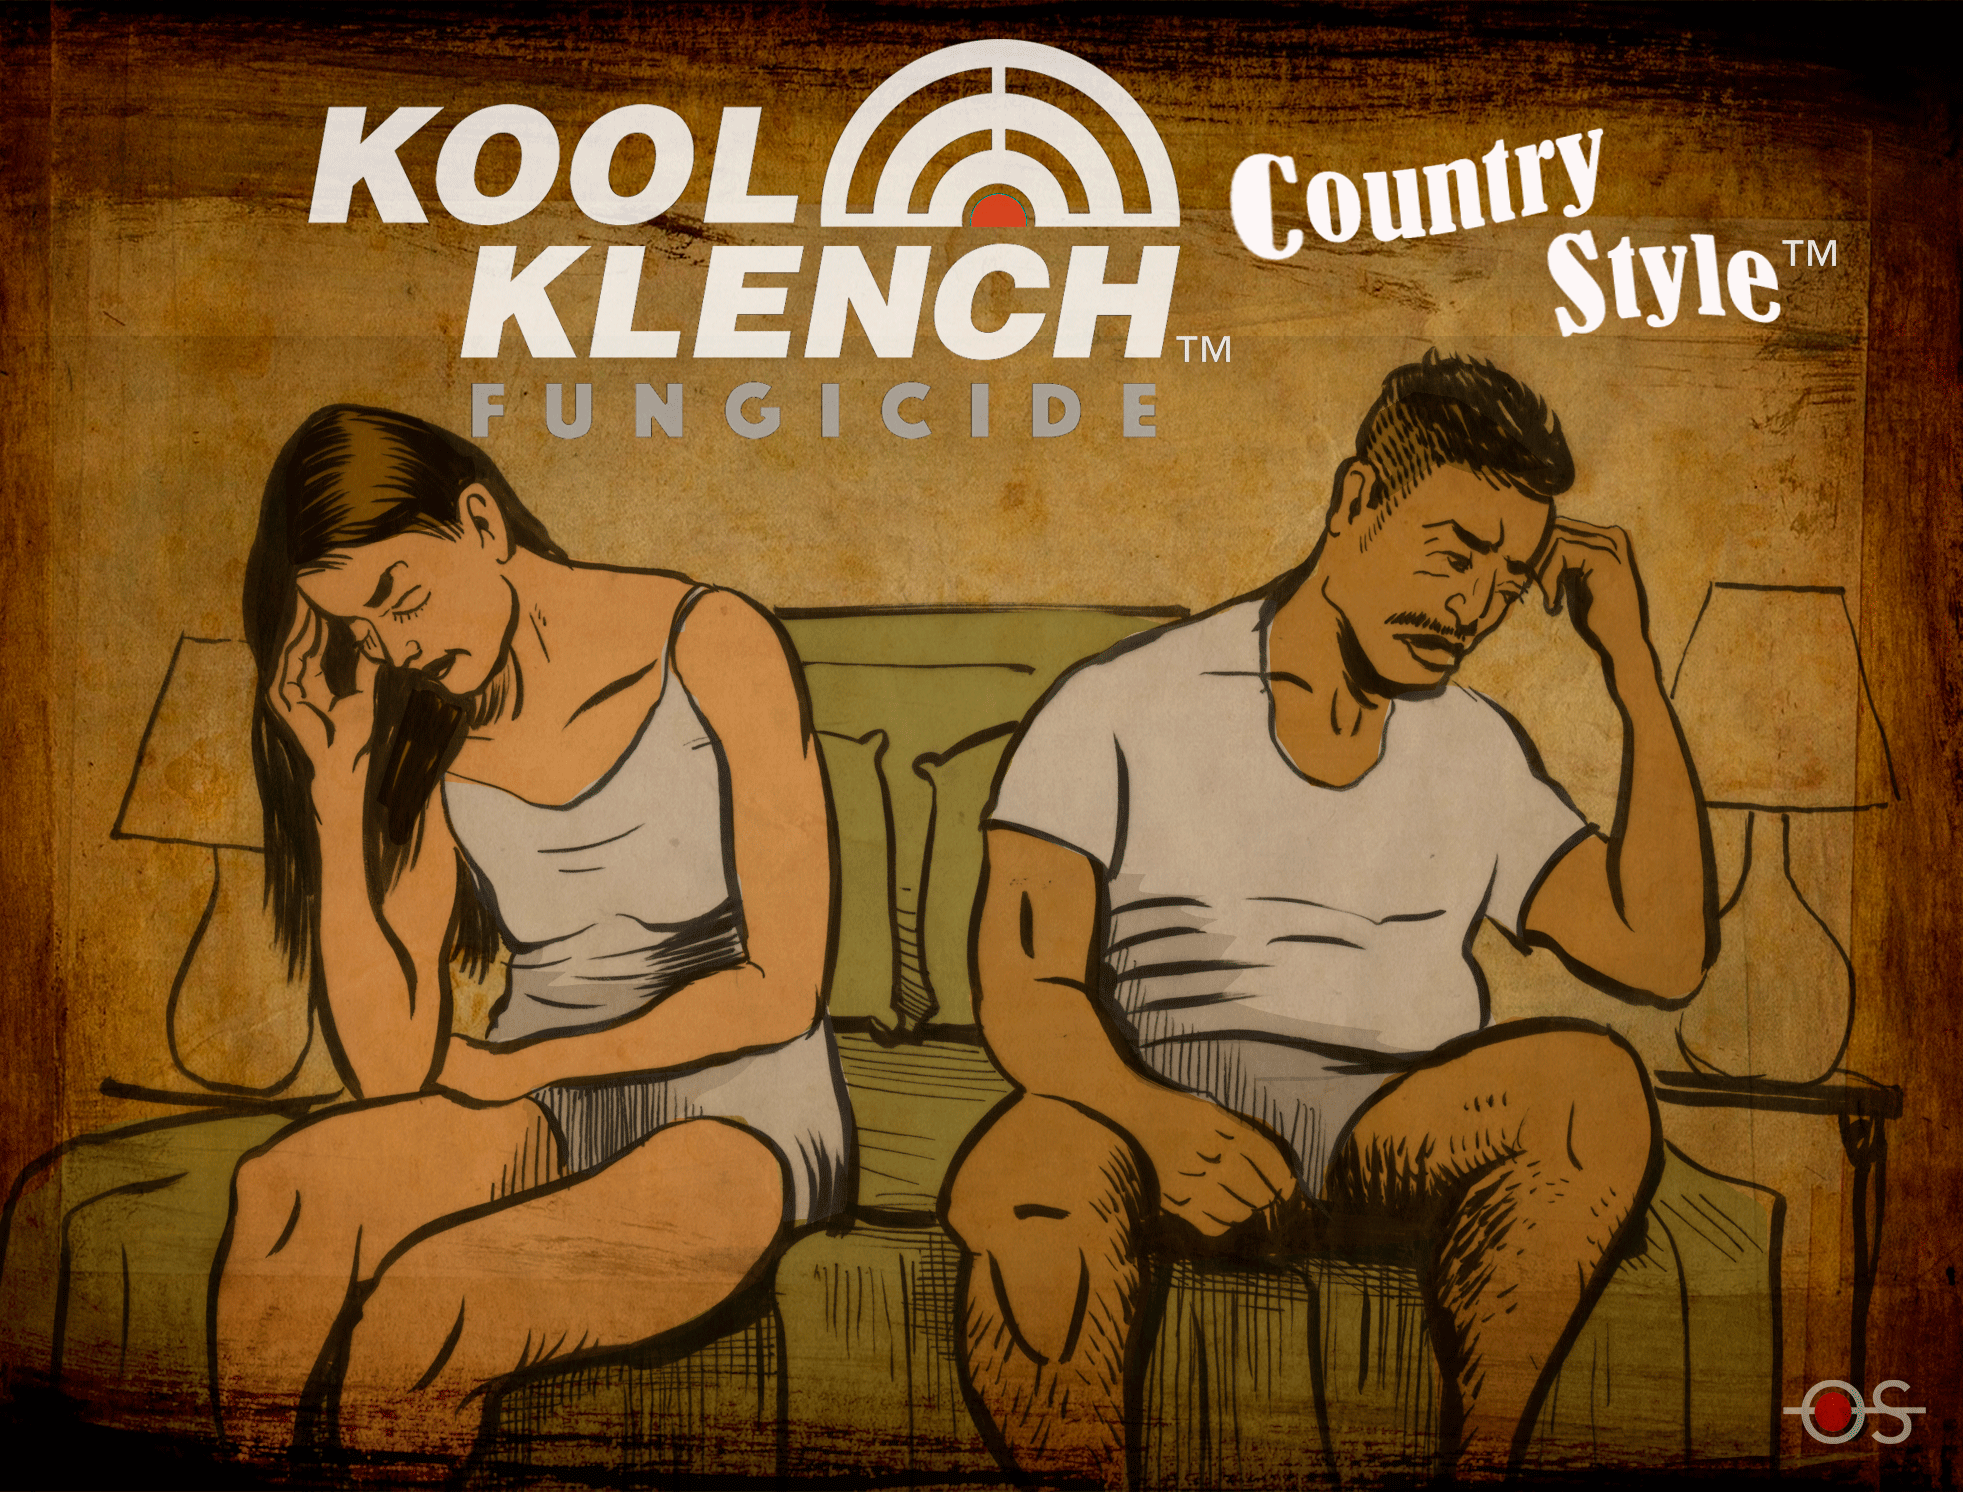 My marriage has 99 problems but foot fungus ain’t [sic] one – Kool Klench™ Country Style™ Fungicide